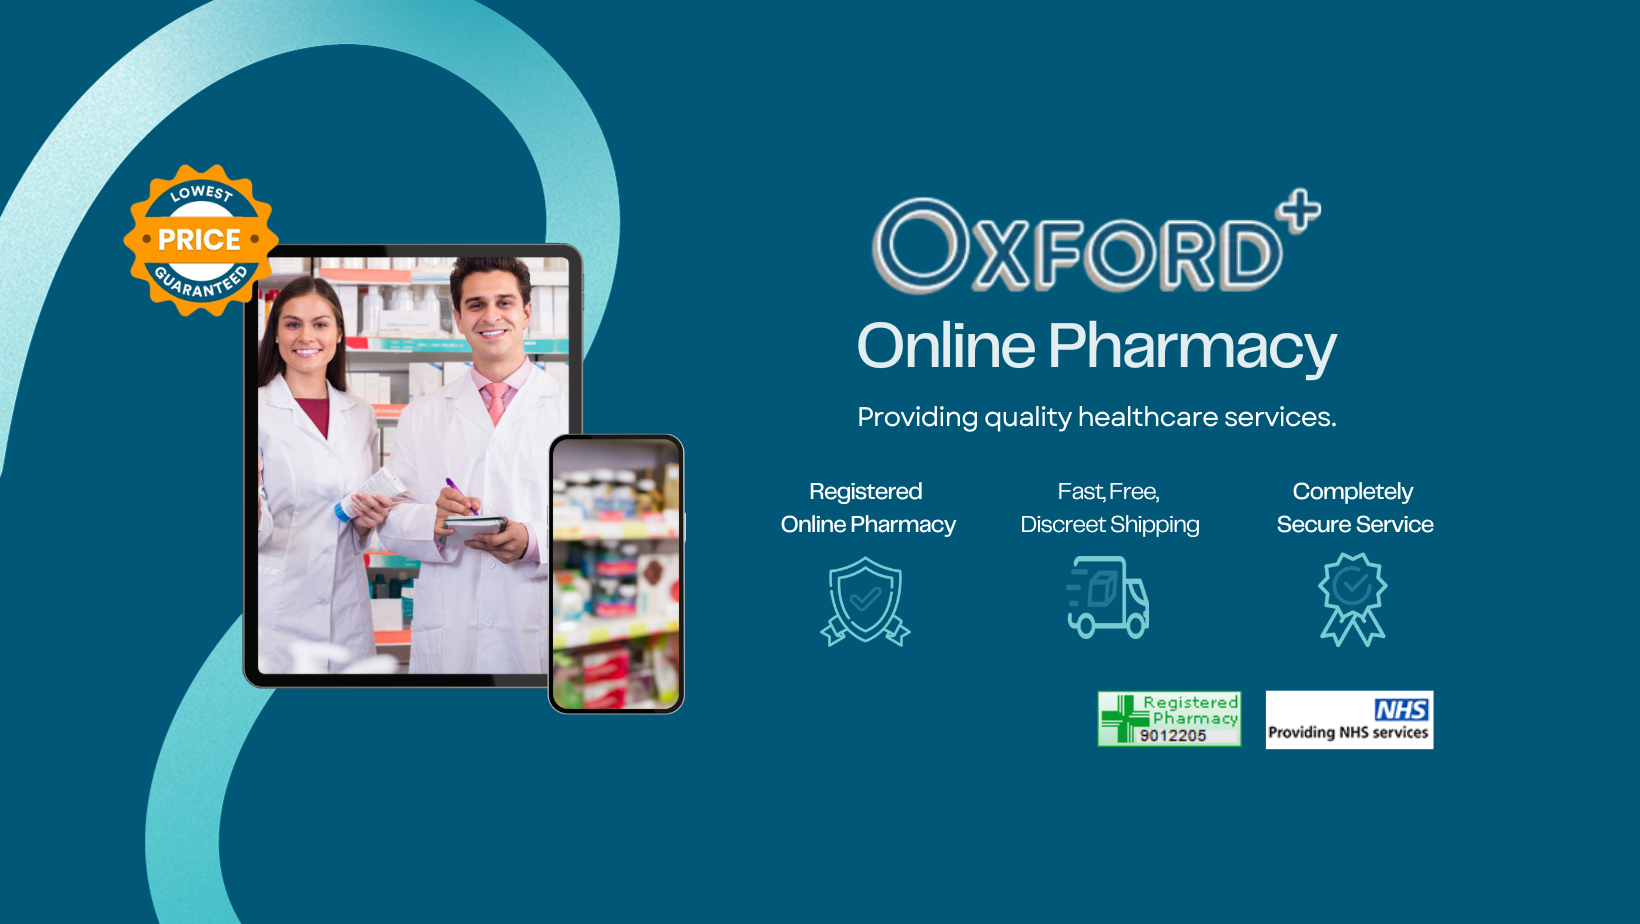 Access exclusive deals, coupons, offers and cashback on Find Reliable Medications at Oxford Online Pharmacy through OODLZ courtesy of Oxford Online Pharmacy.